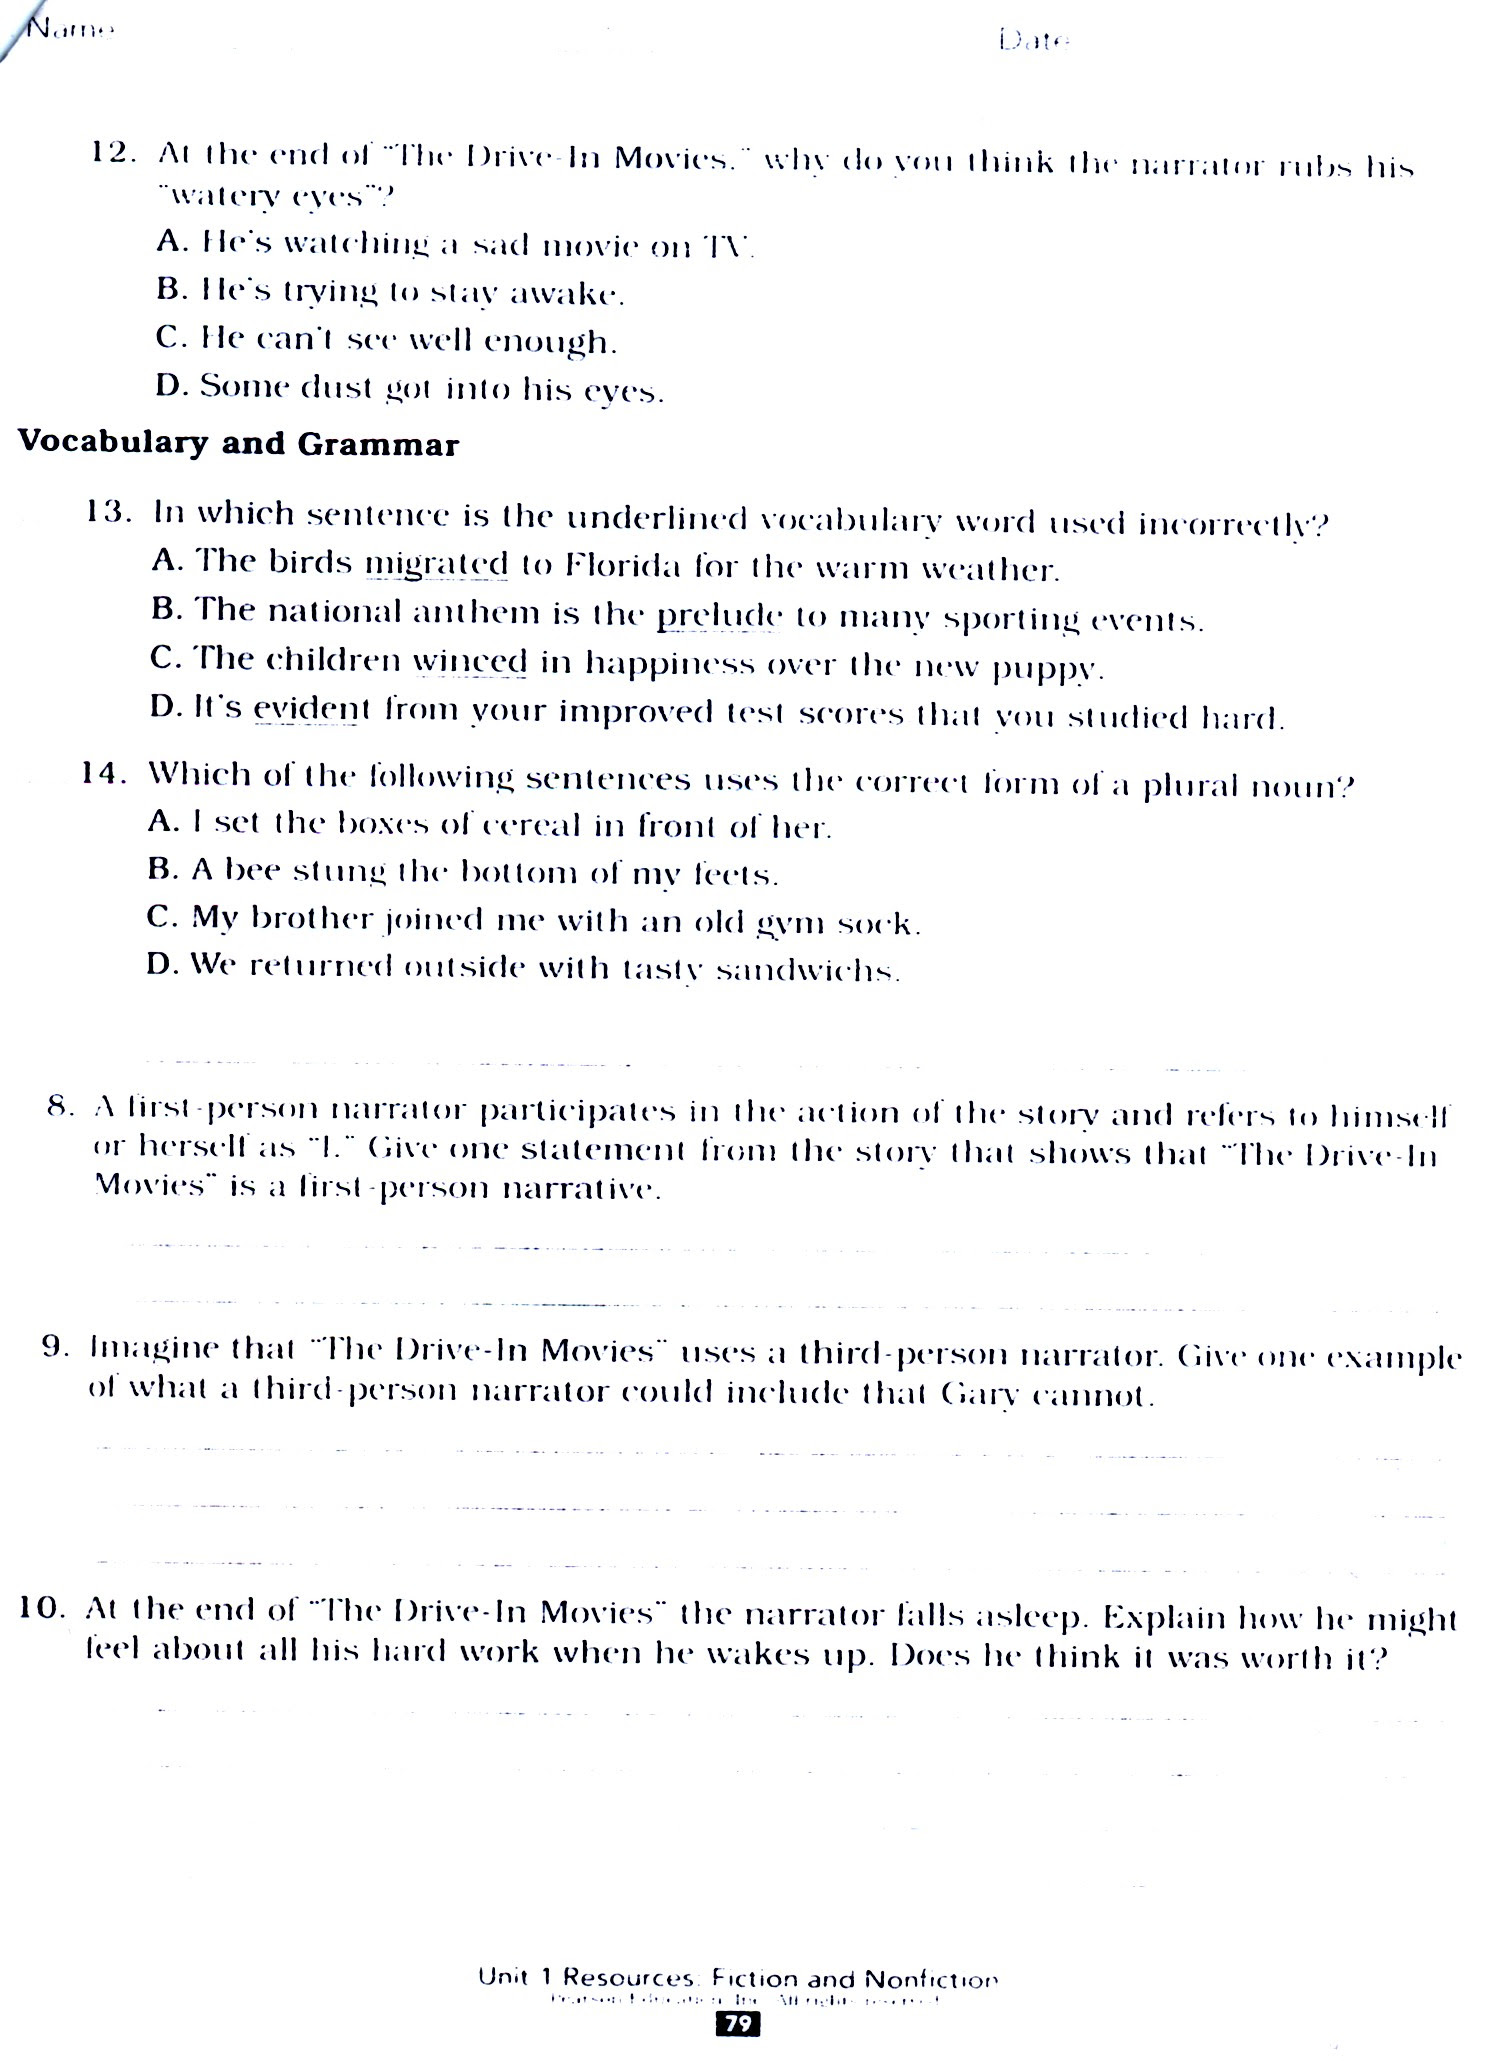 geography-worksheet-new-256-6th-grade-social-studies-geography-worksheets